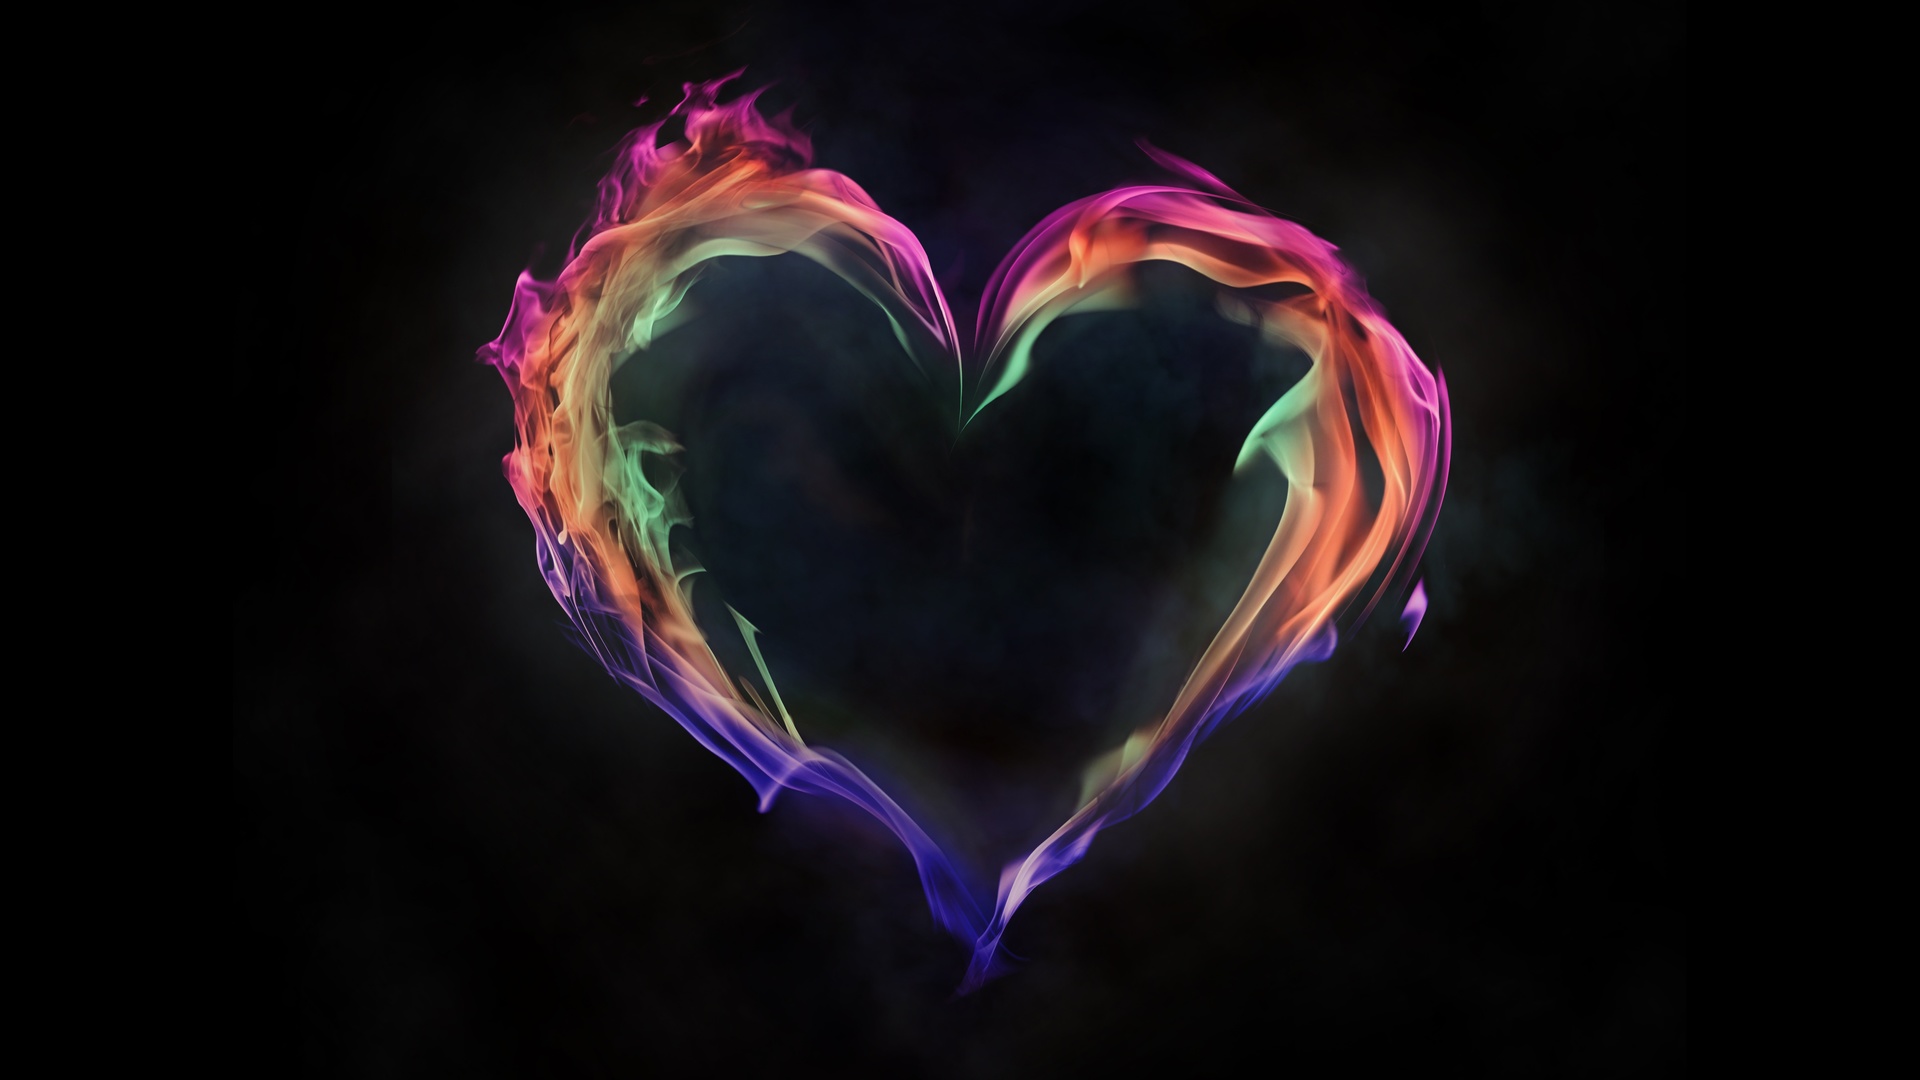 Flame Artistic Heart Love 5k Rm - Heart Pics In Black Background , HD Wallpaper & Backgrounds